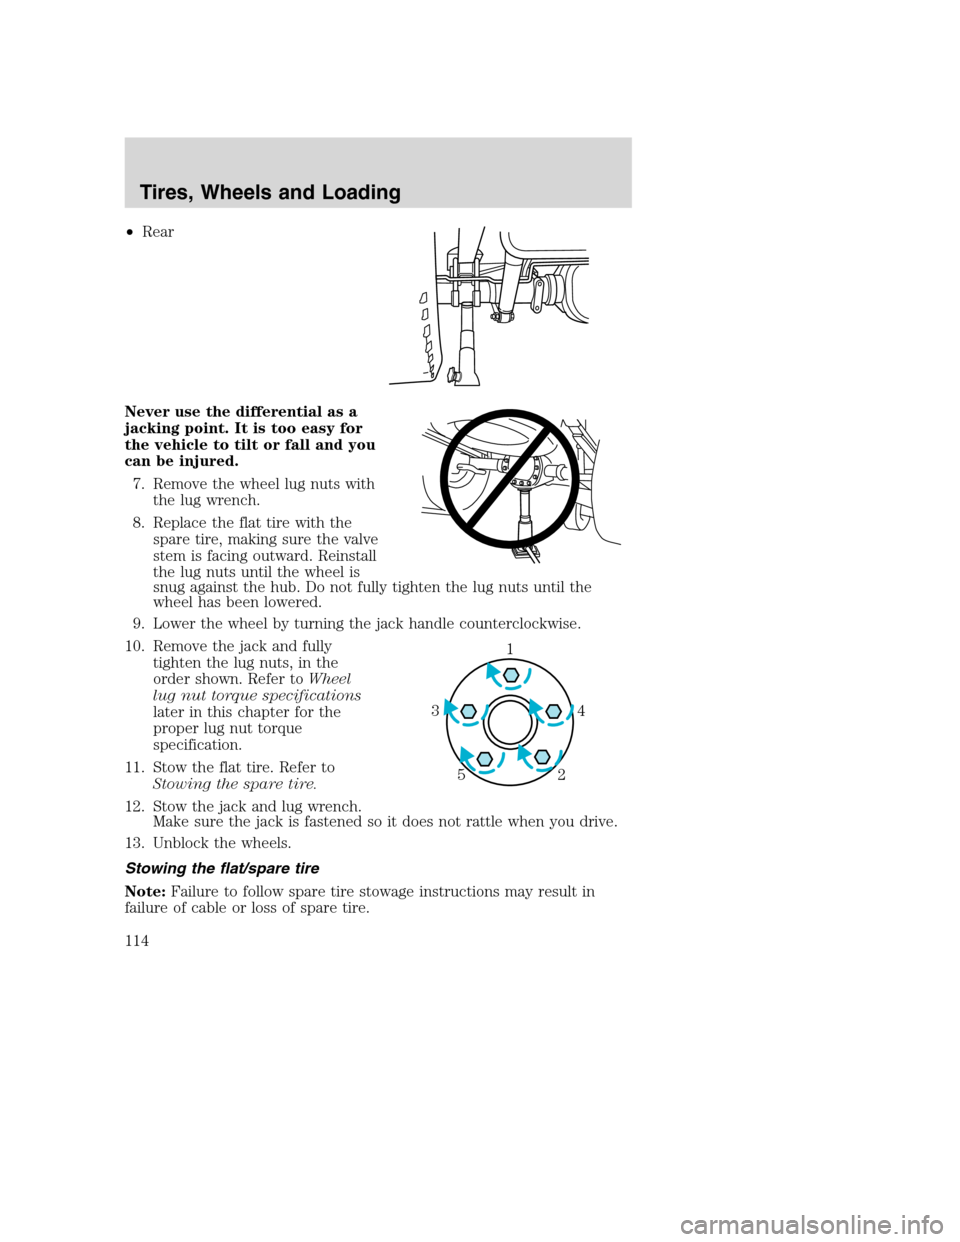 MAZDA MODEL B-SERIES 2005  Owners Manual (in English) •Rear
Never use the differential as a
jacking point. It is too easy for
the vehicle to tilt or fall and you
can be injured.
7. Remove the wheel lug nuts with
the lug wrench.
8. Replace the flat tire